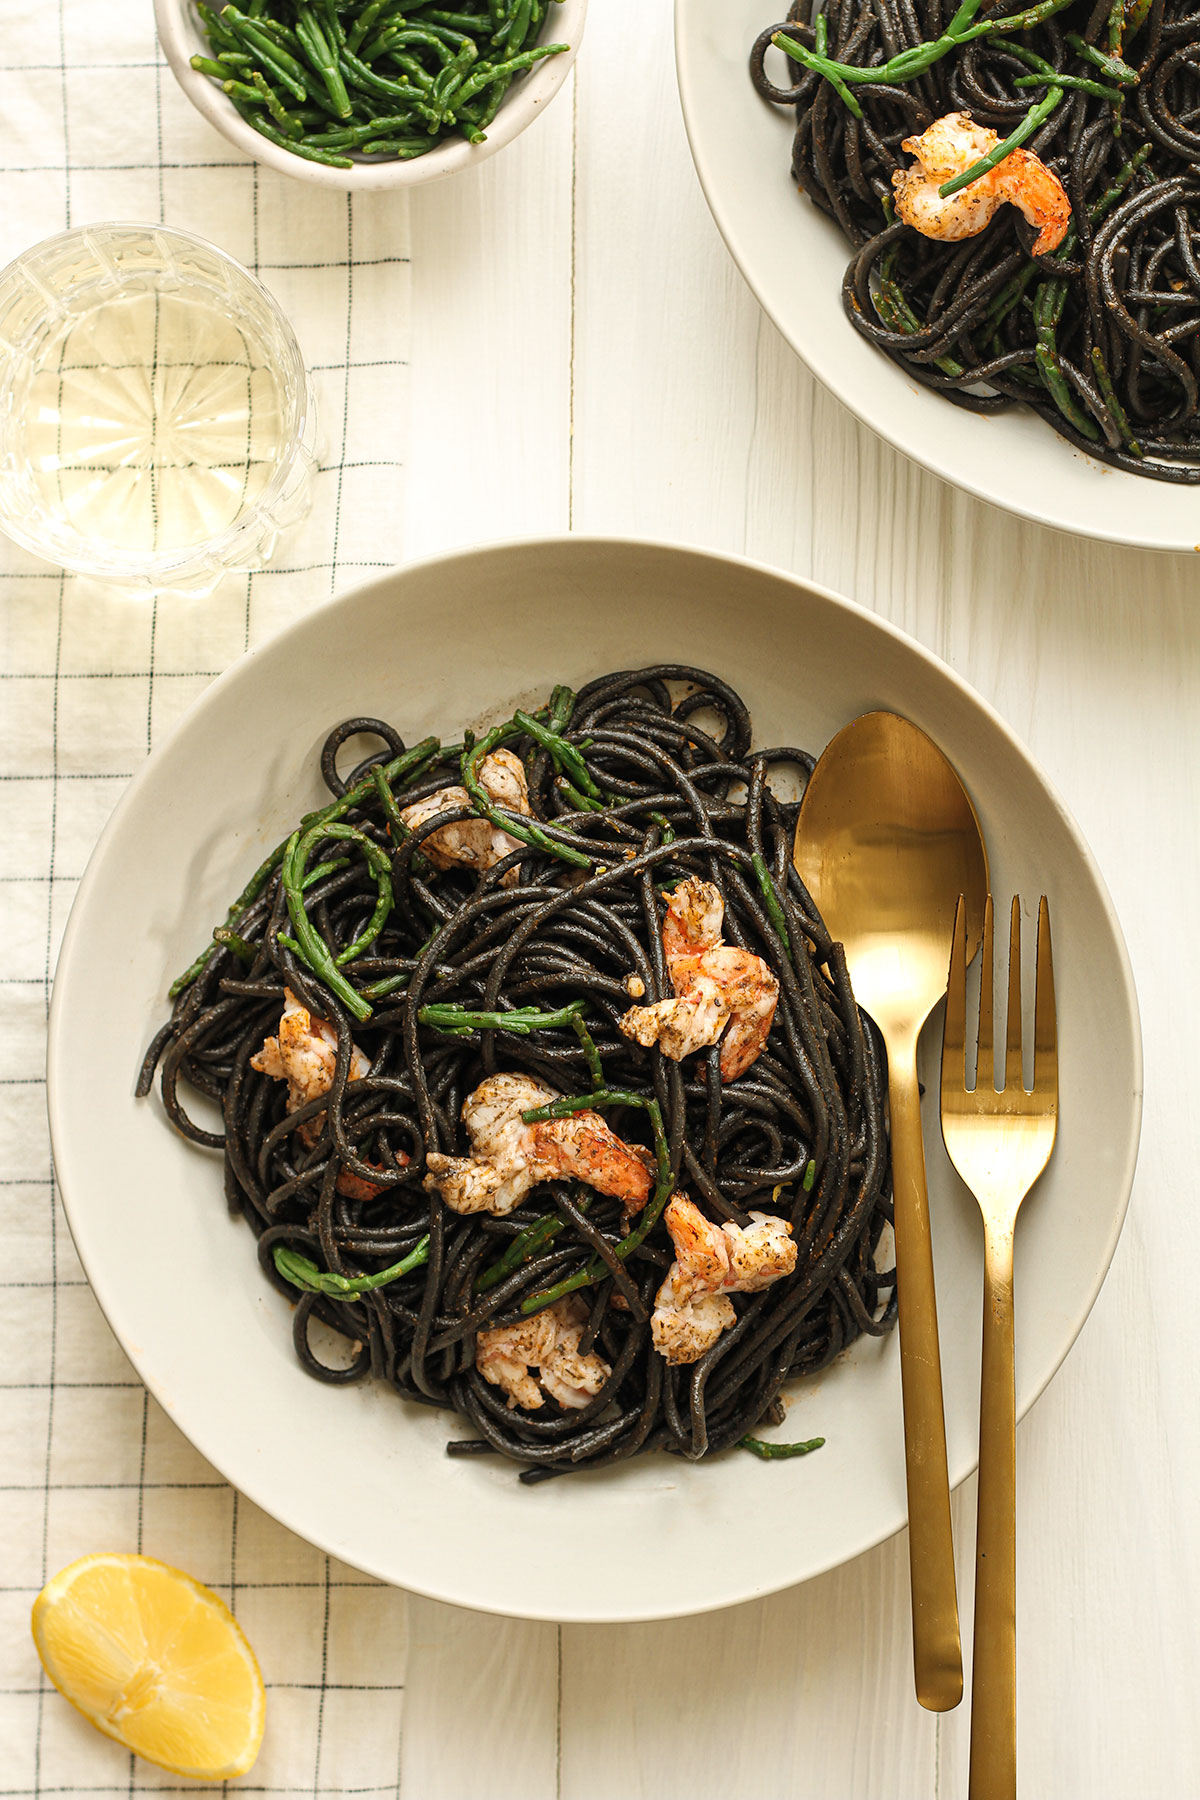 Two white plates of black squid ink pasta topped with samphire and cooked prawns with a small dish of samphire and a slice of lemon.